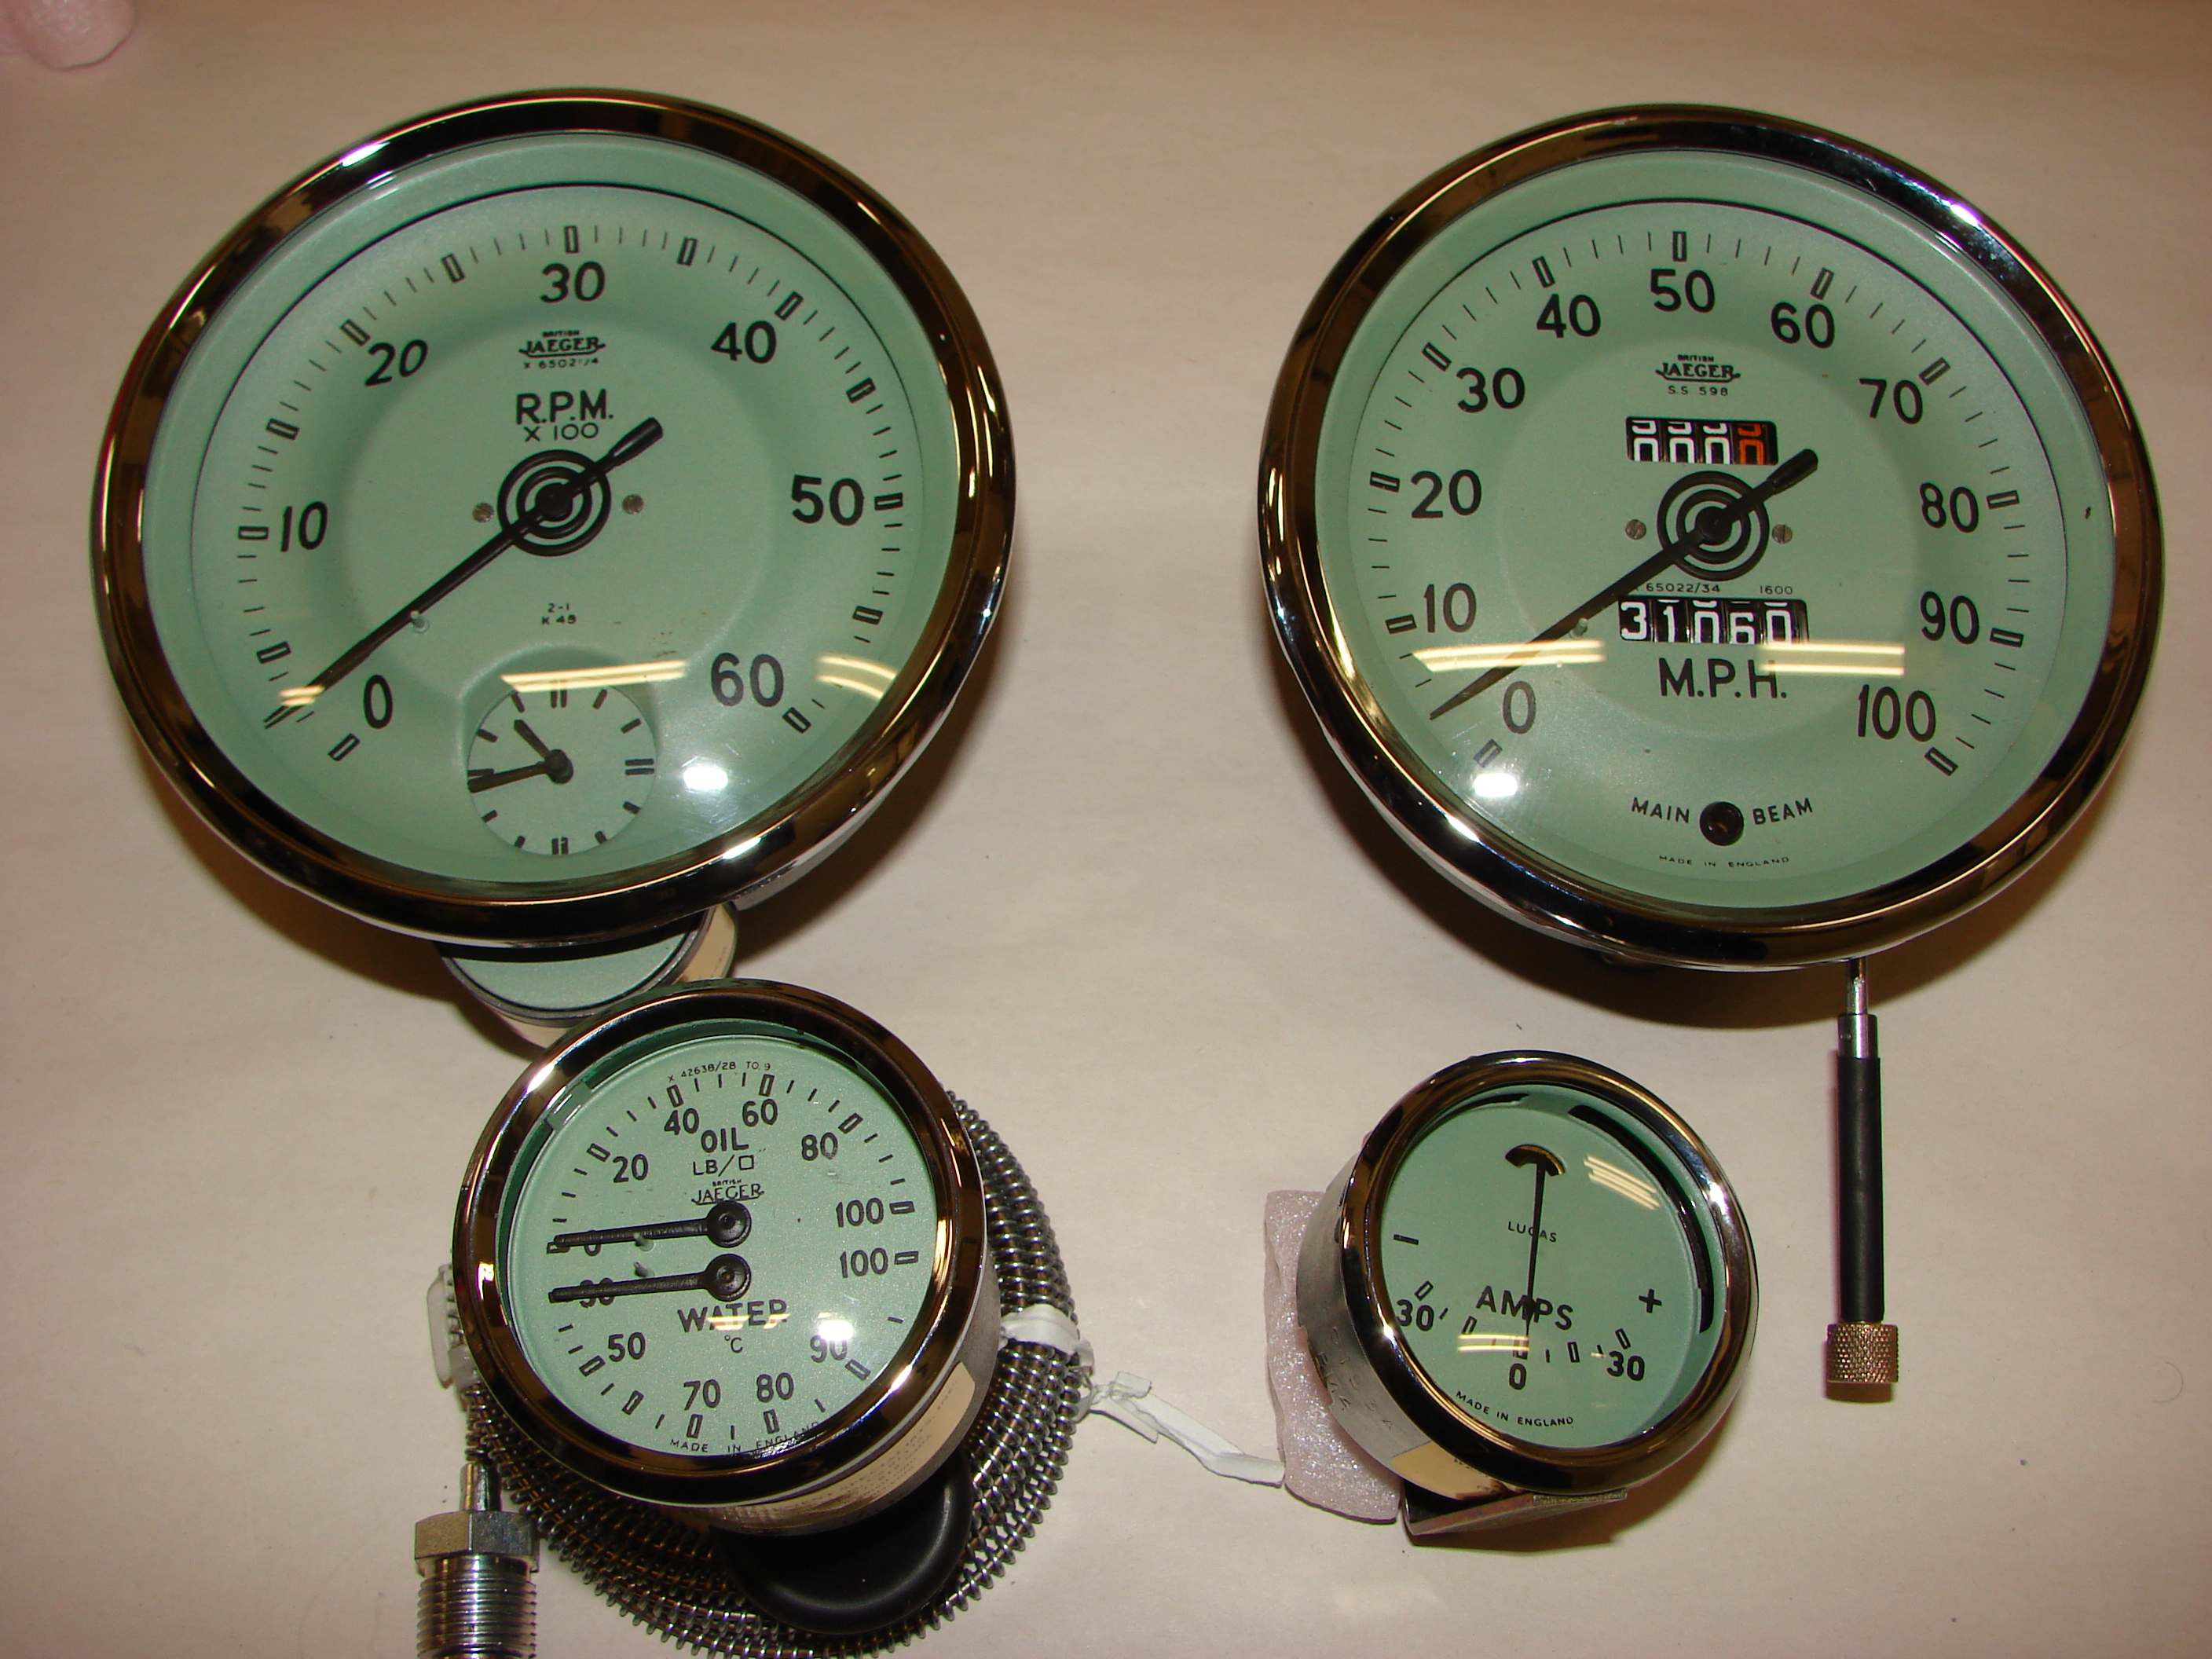 Two large speedometers and two smaller instruments